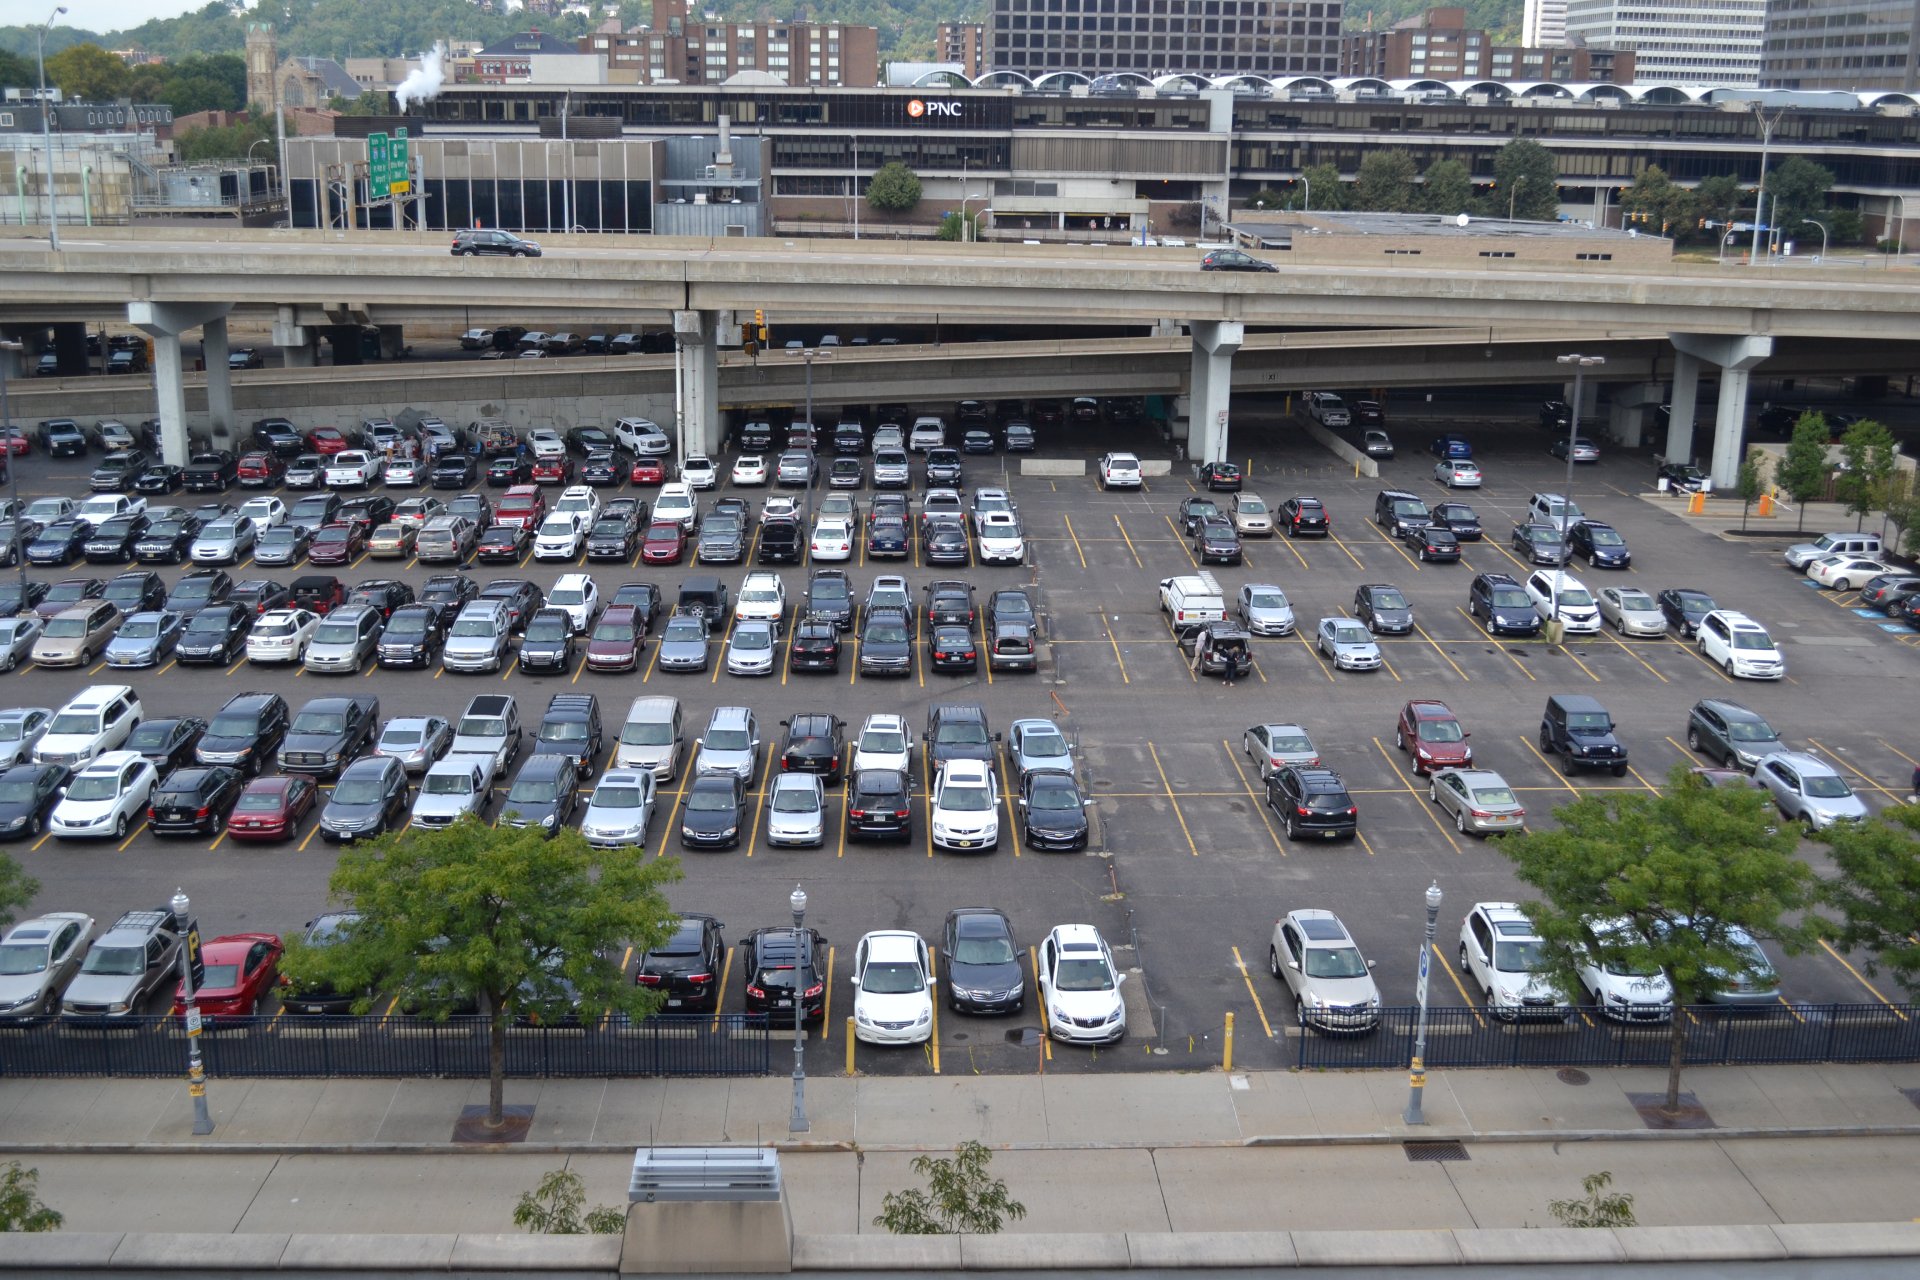 Its downtown location means that there's all sorts of parking available around PNC Park.